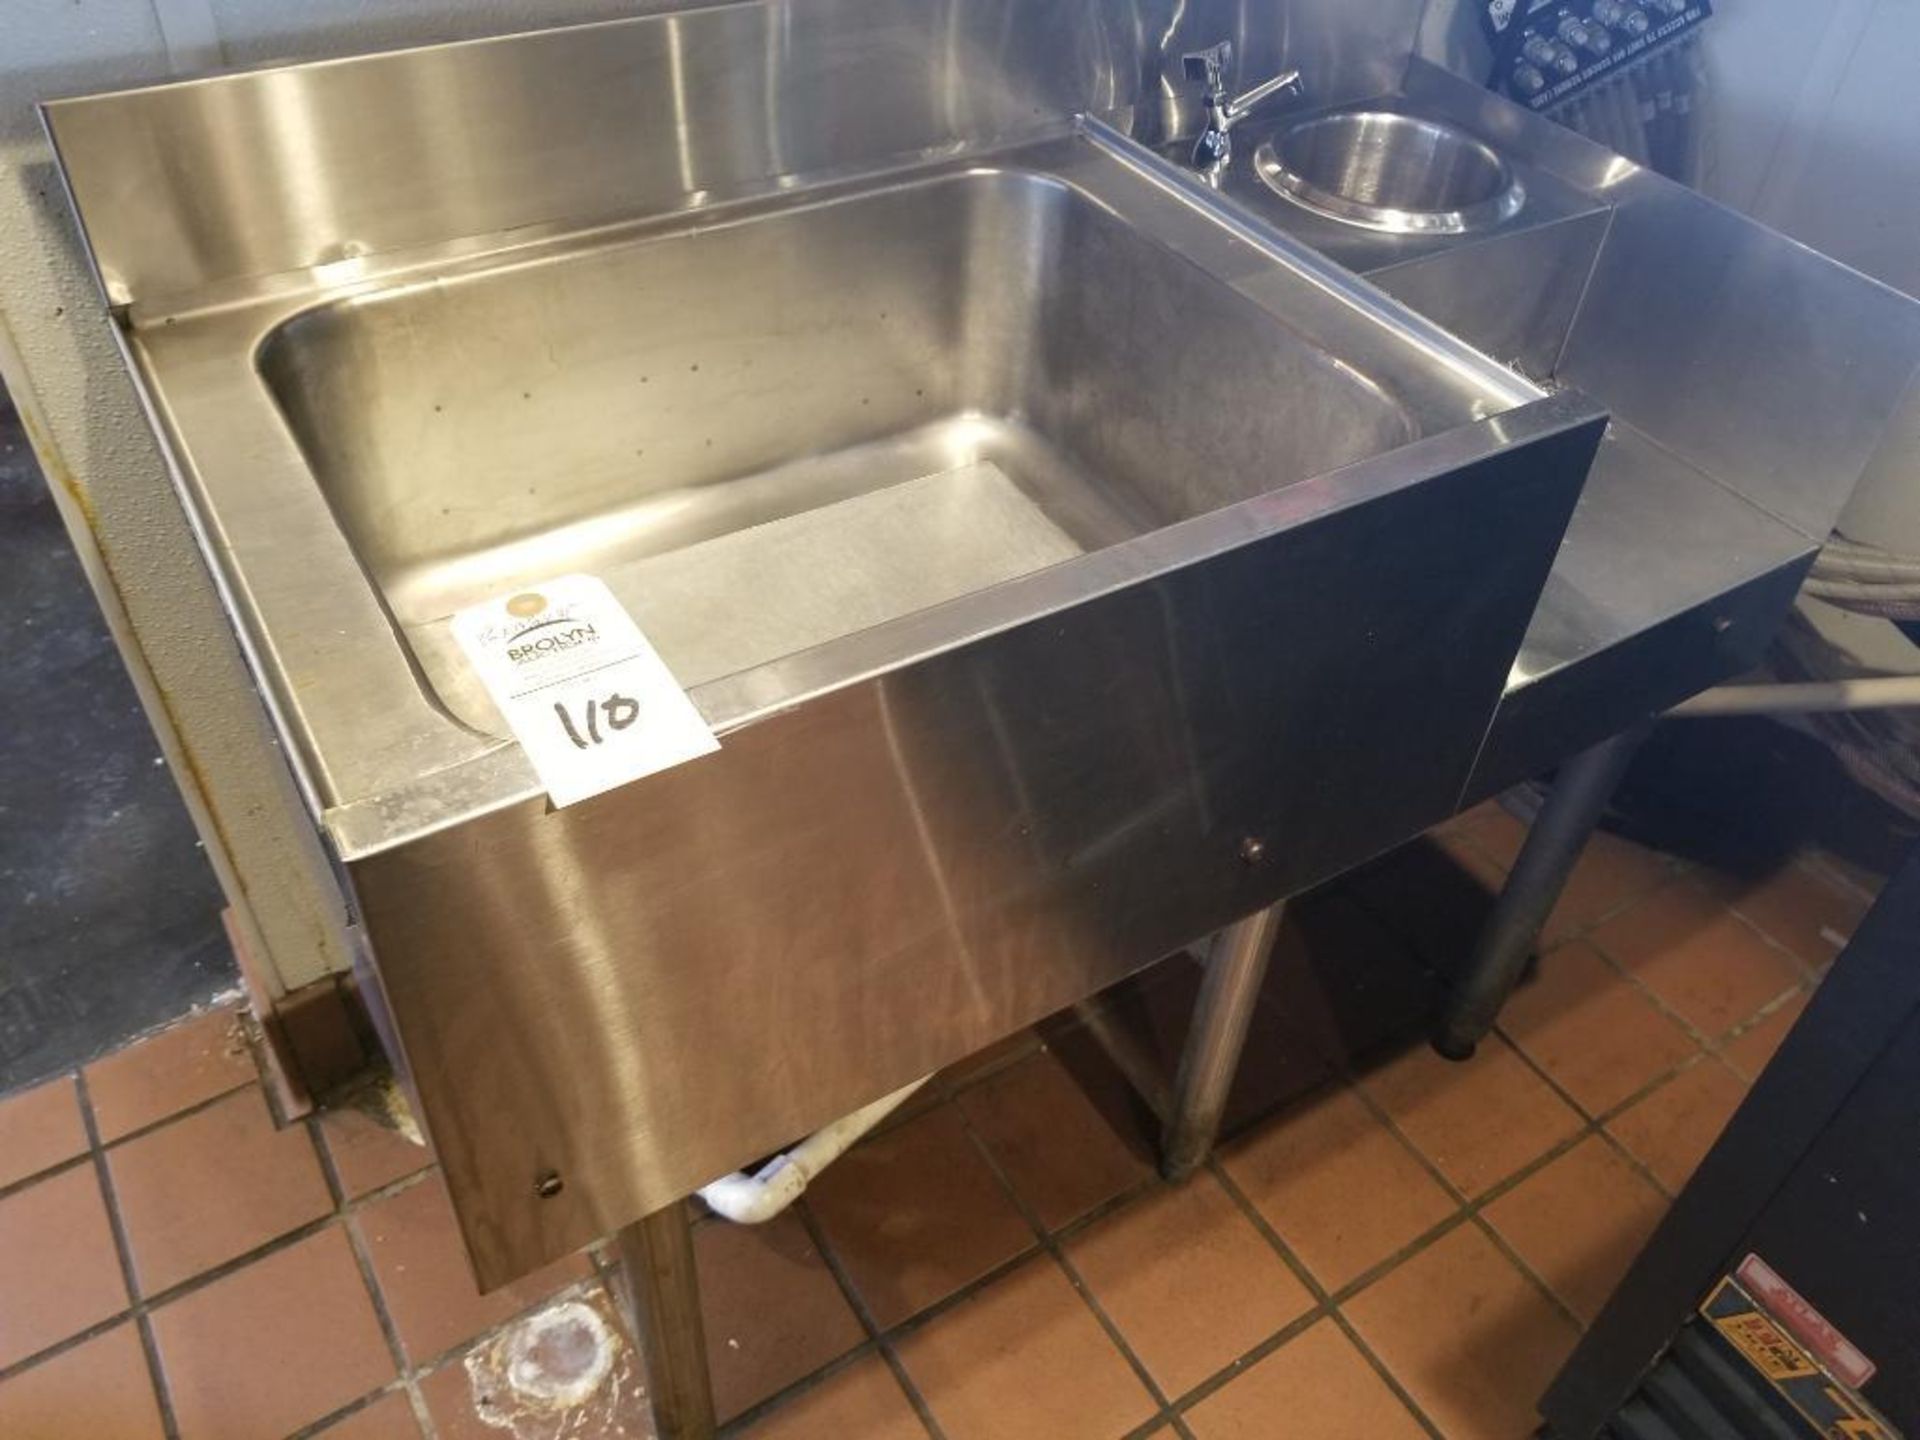 Stainless steel prep table. 36" x 18-1/2" x 31".